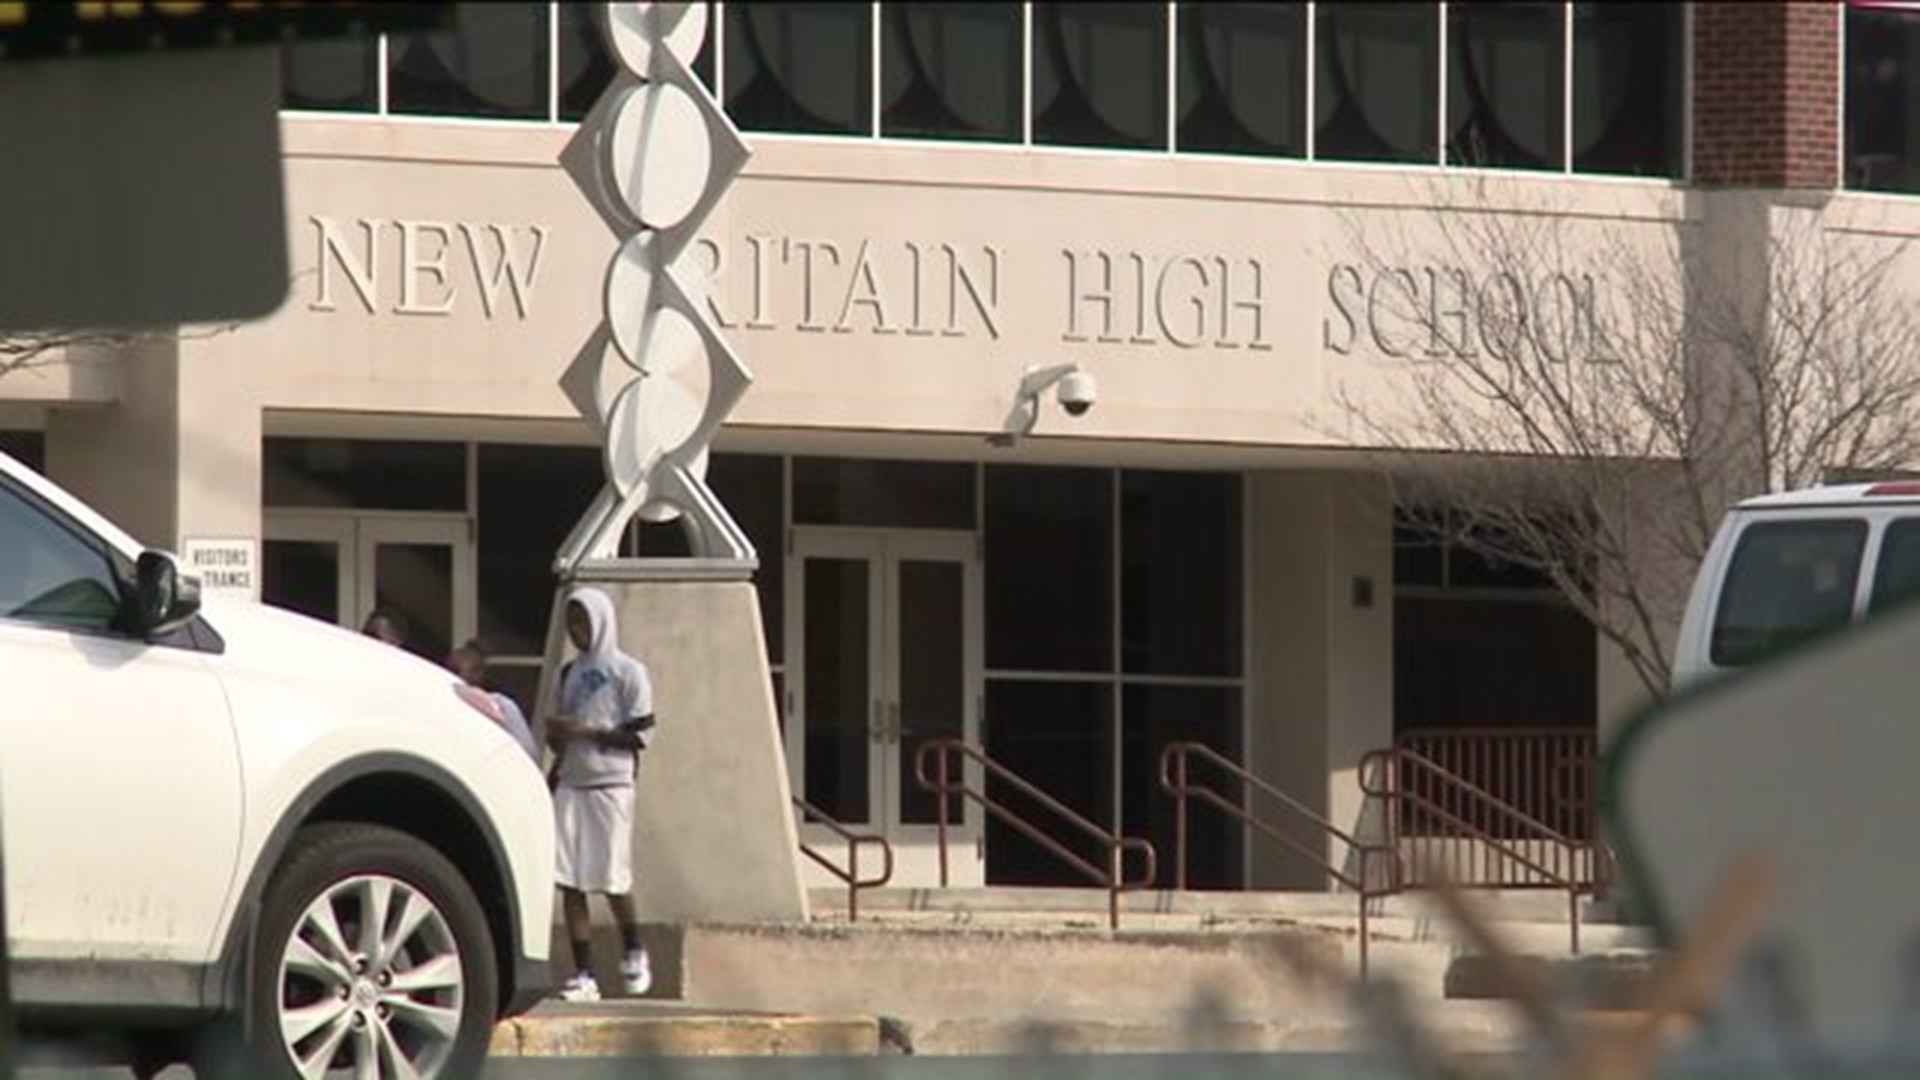 Huge fight breaks out in front of New Britain High School, leading to arrests